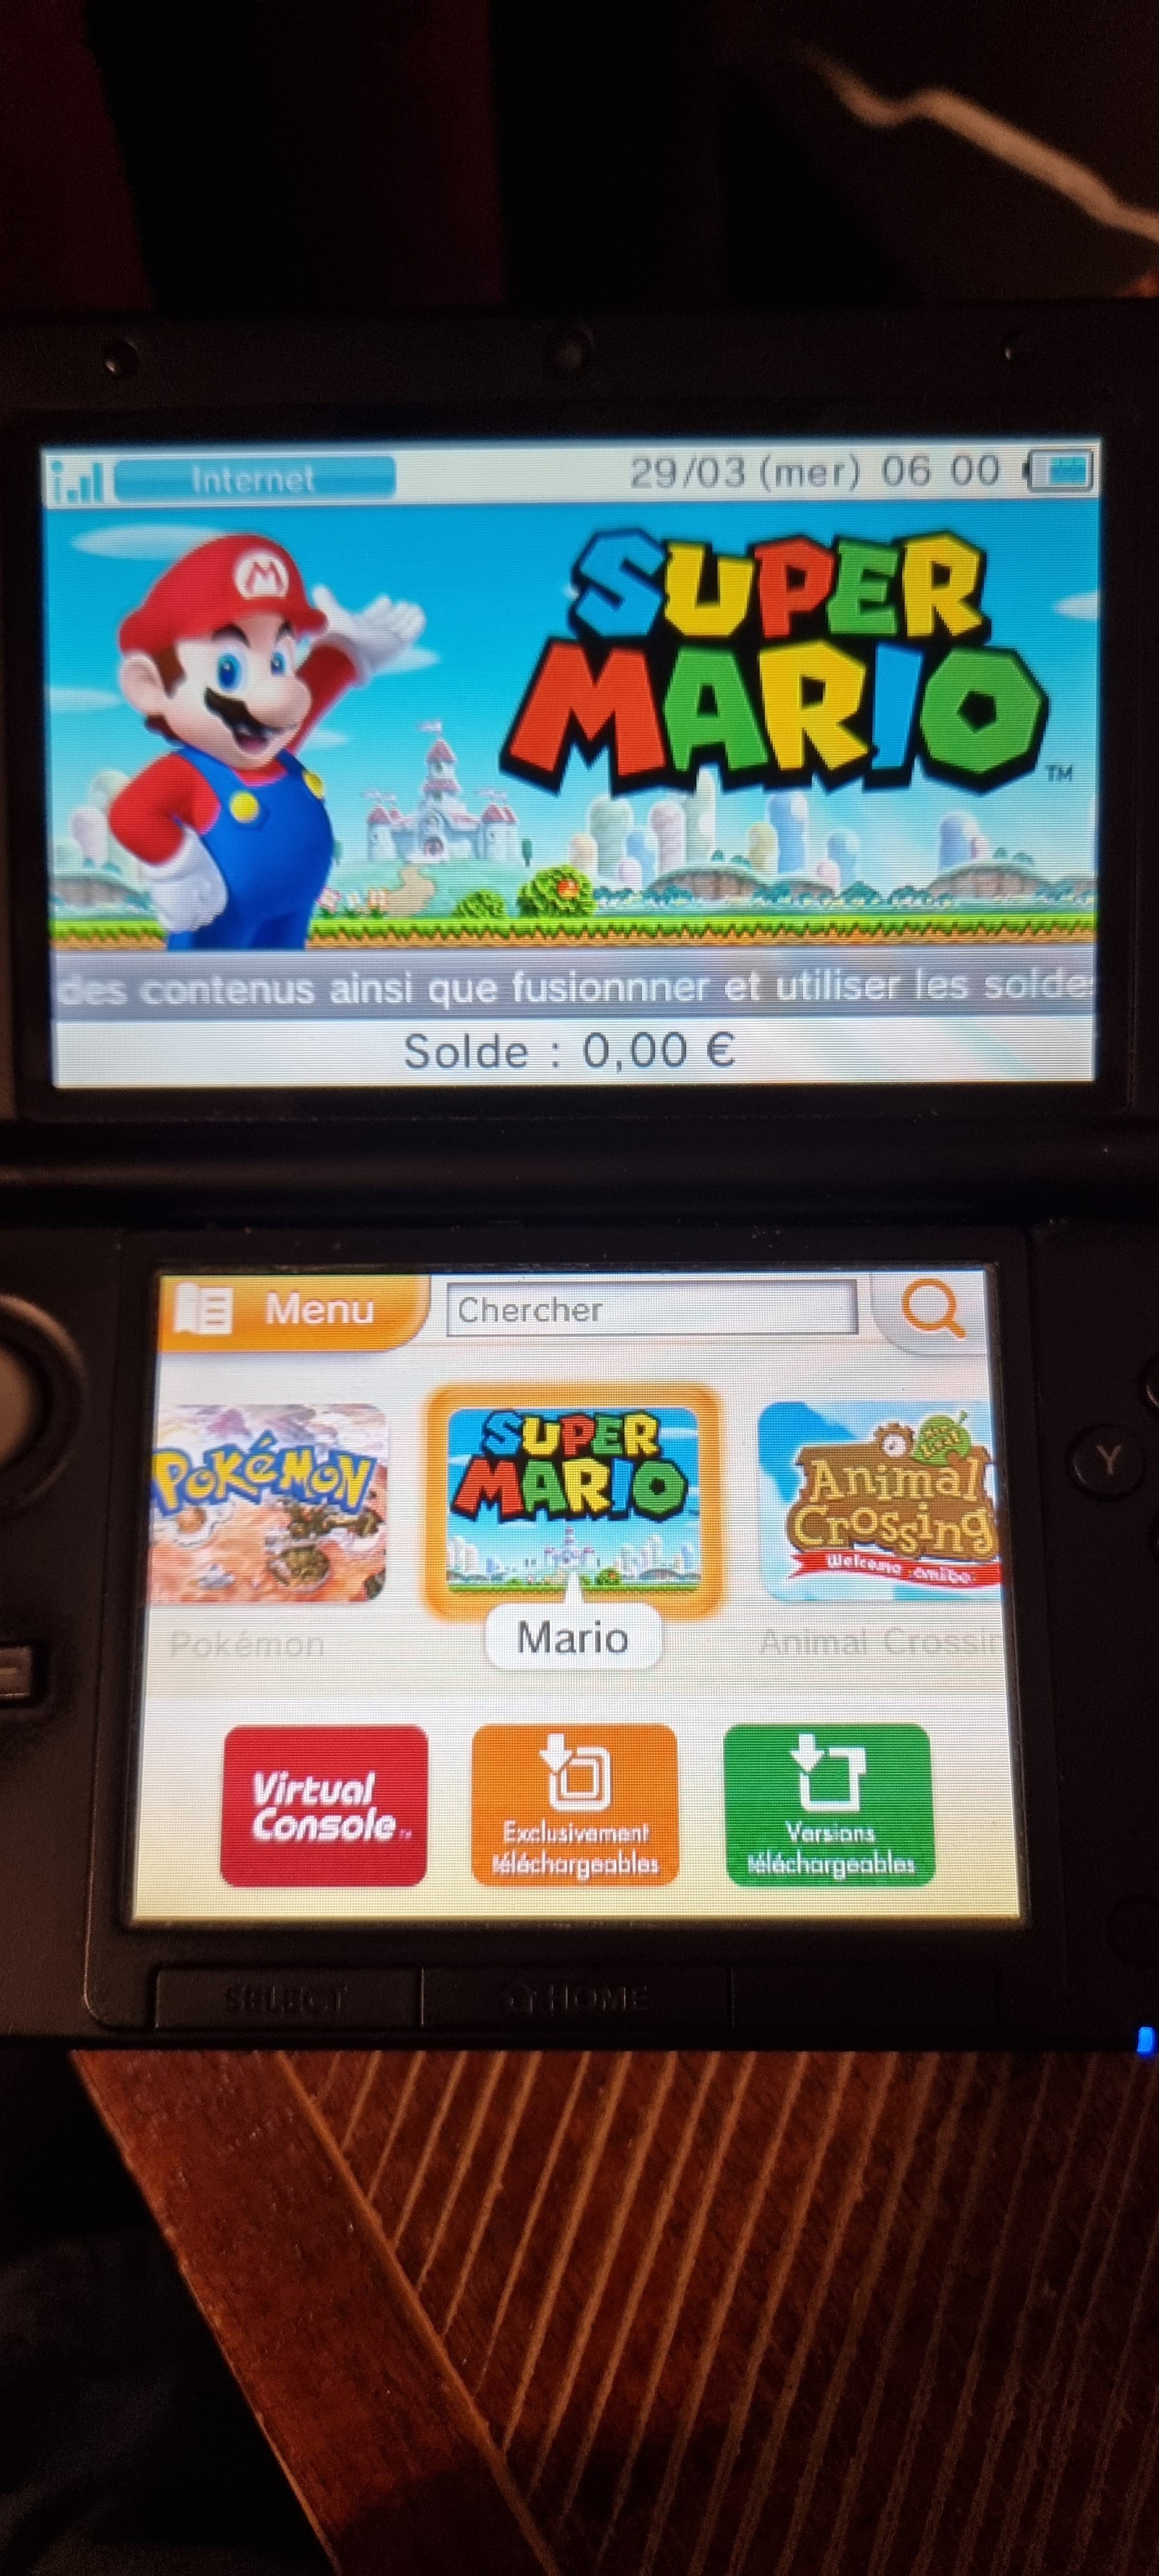 Petition · Save the Nintendo eShop on Wii U and Nintendo 3DS